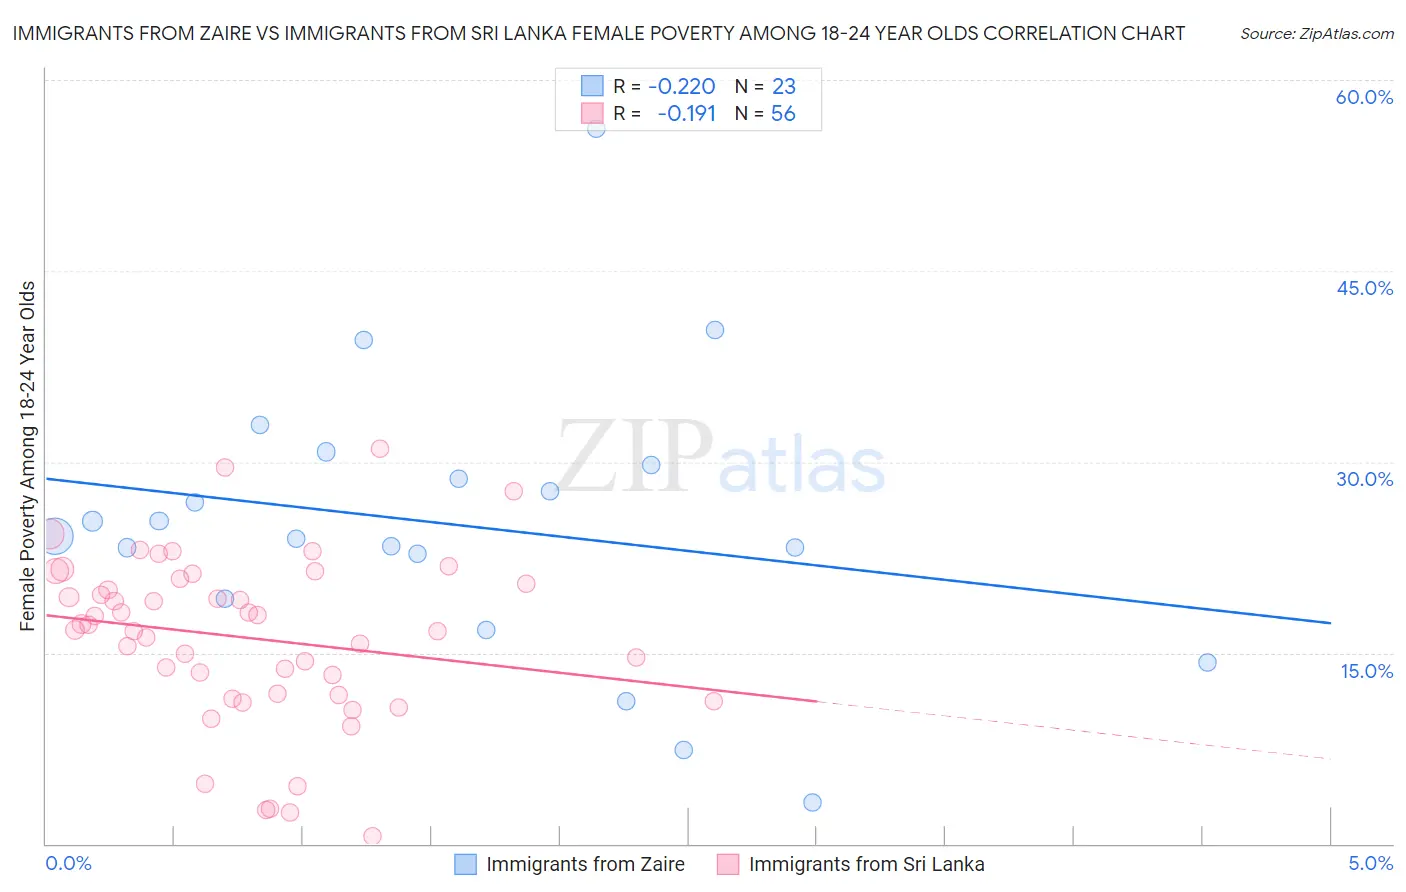 Immigrants from Zaire vs Immigrants from Sri Lanka Female Poverty Among 18-24 Year Olds